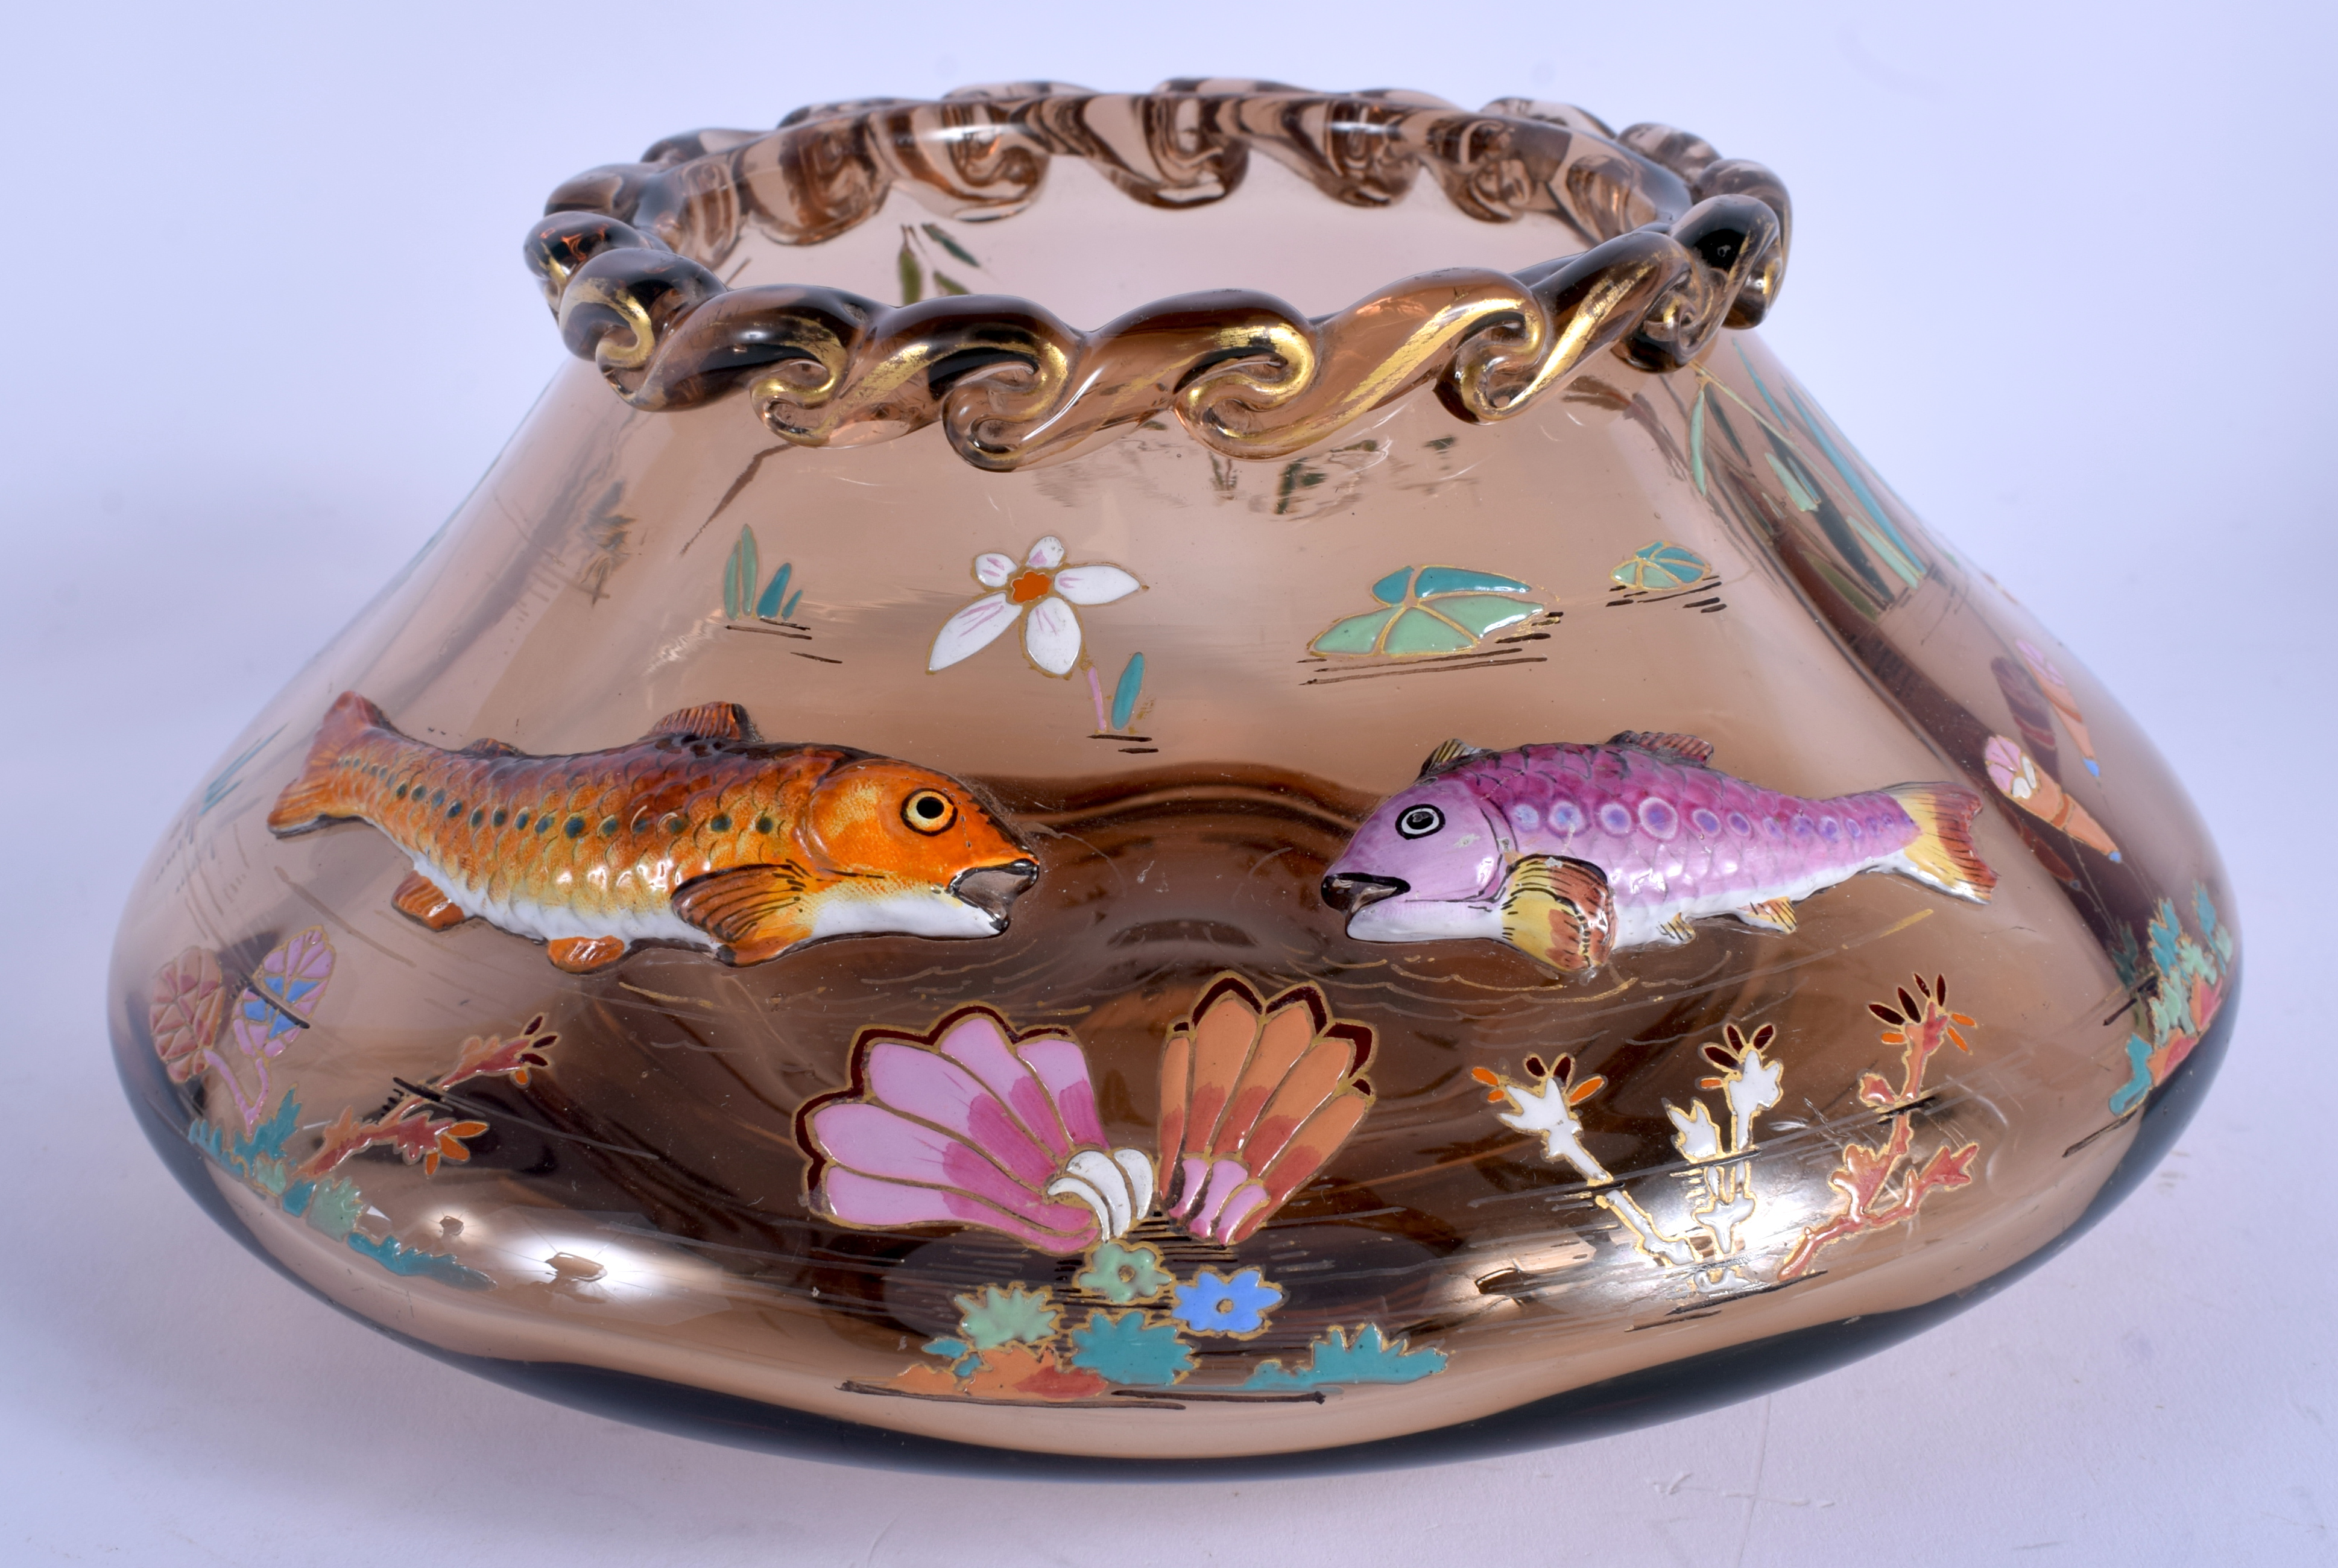 A LOVELY ART NOUVEAU ENAMELLED GLASS BOWL in the manner of Moser, decorated in relief with fish. 21